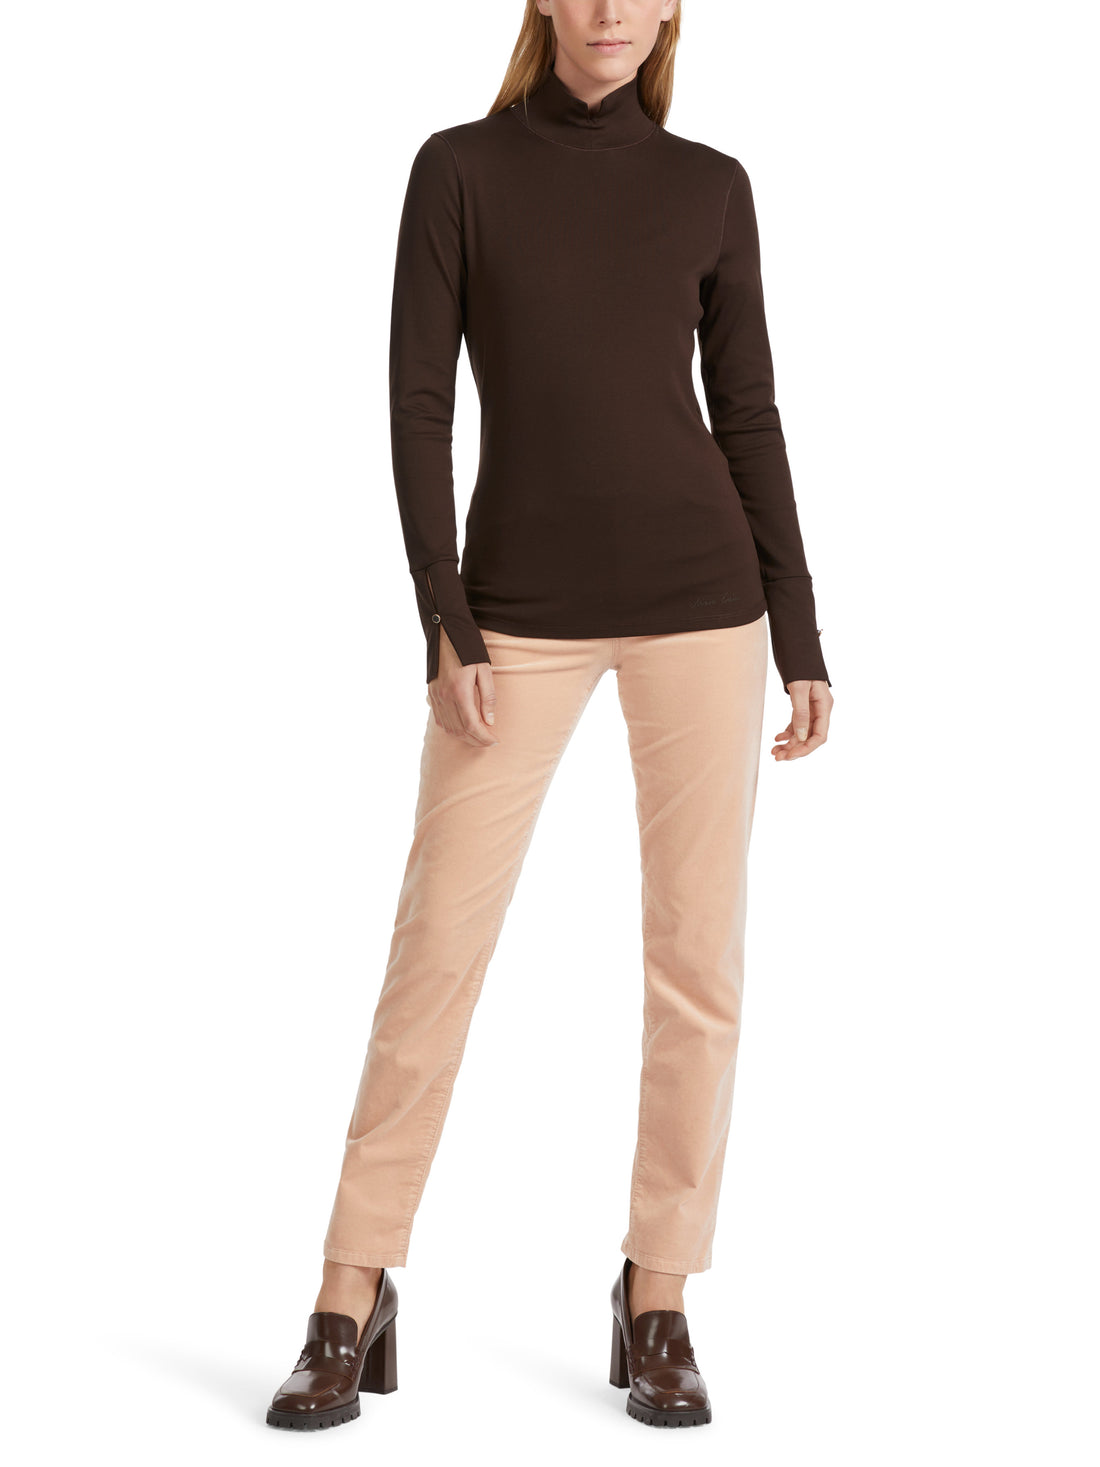 T-Shirt With Slit Roll Neck_VC 48.17 J14_699_02